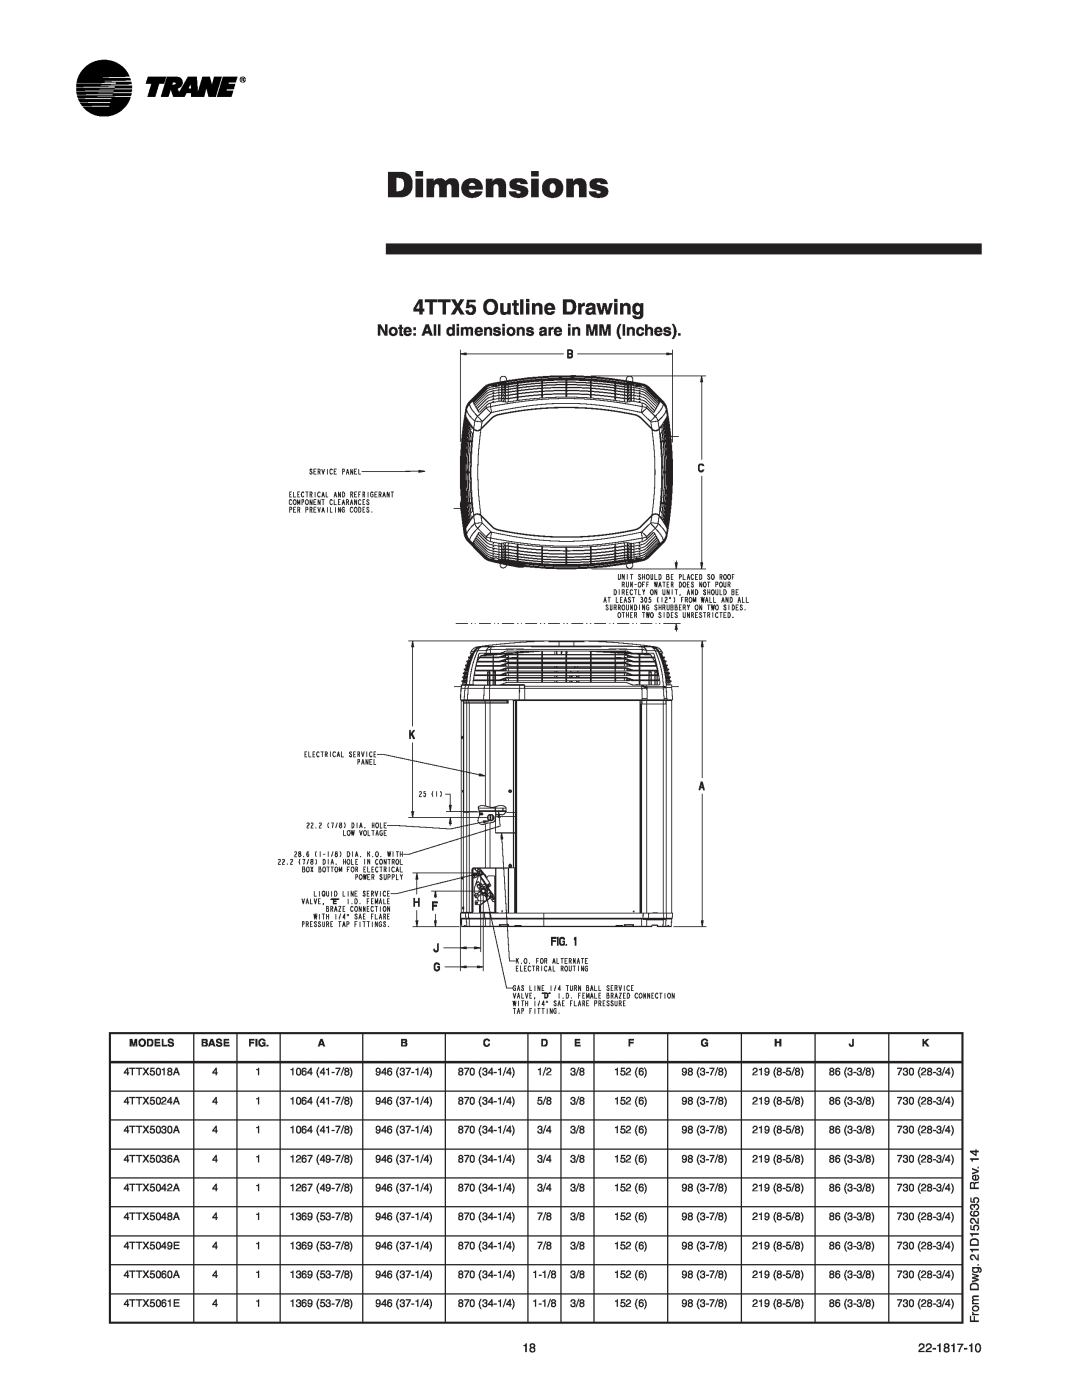 Trane 4TTX5018A1, 4TTX5061E, 4TTX5060A1, 4TTX5036A1 Dimensions, 4TTX5 Outline Drawing, Note All dimensions are in MM Inches 